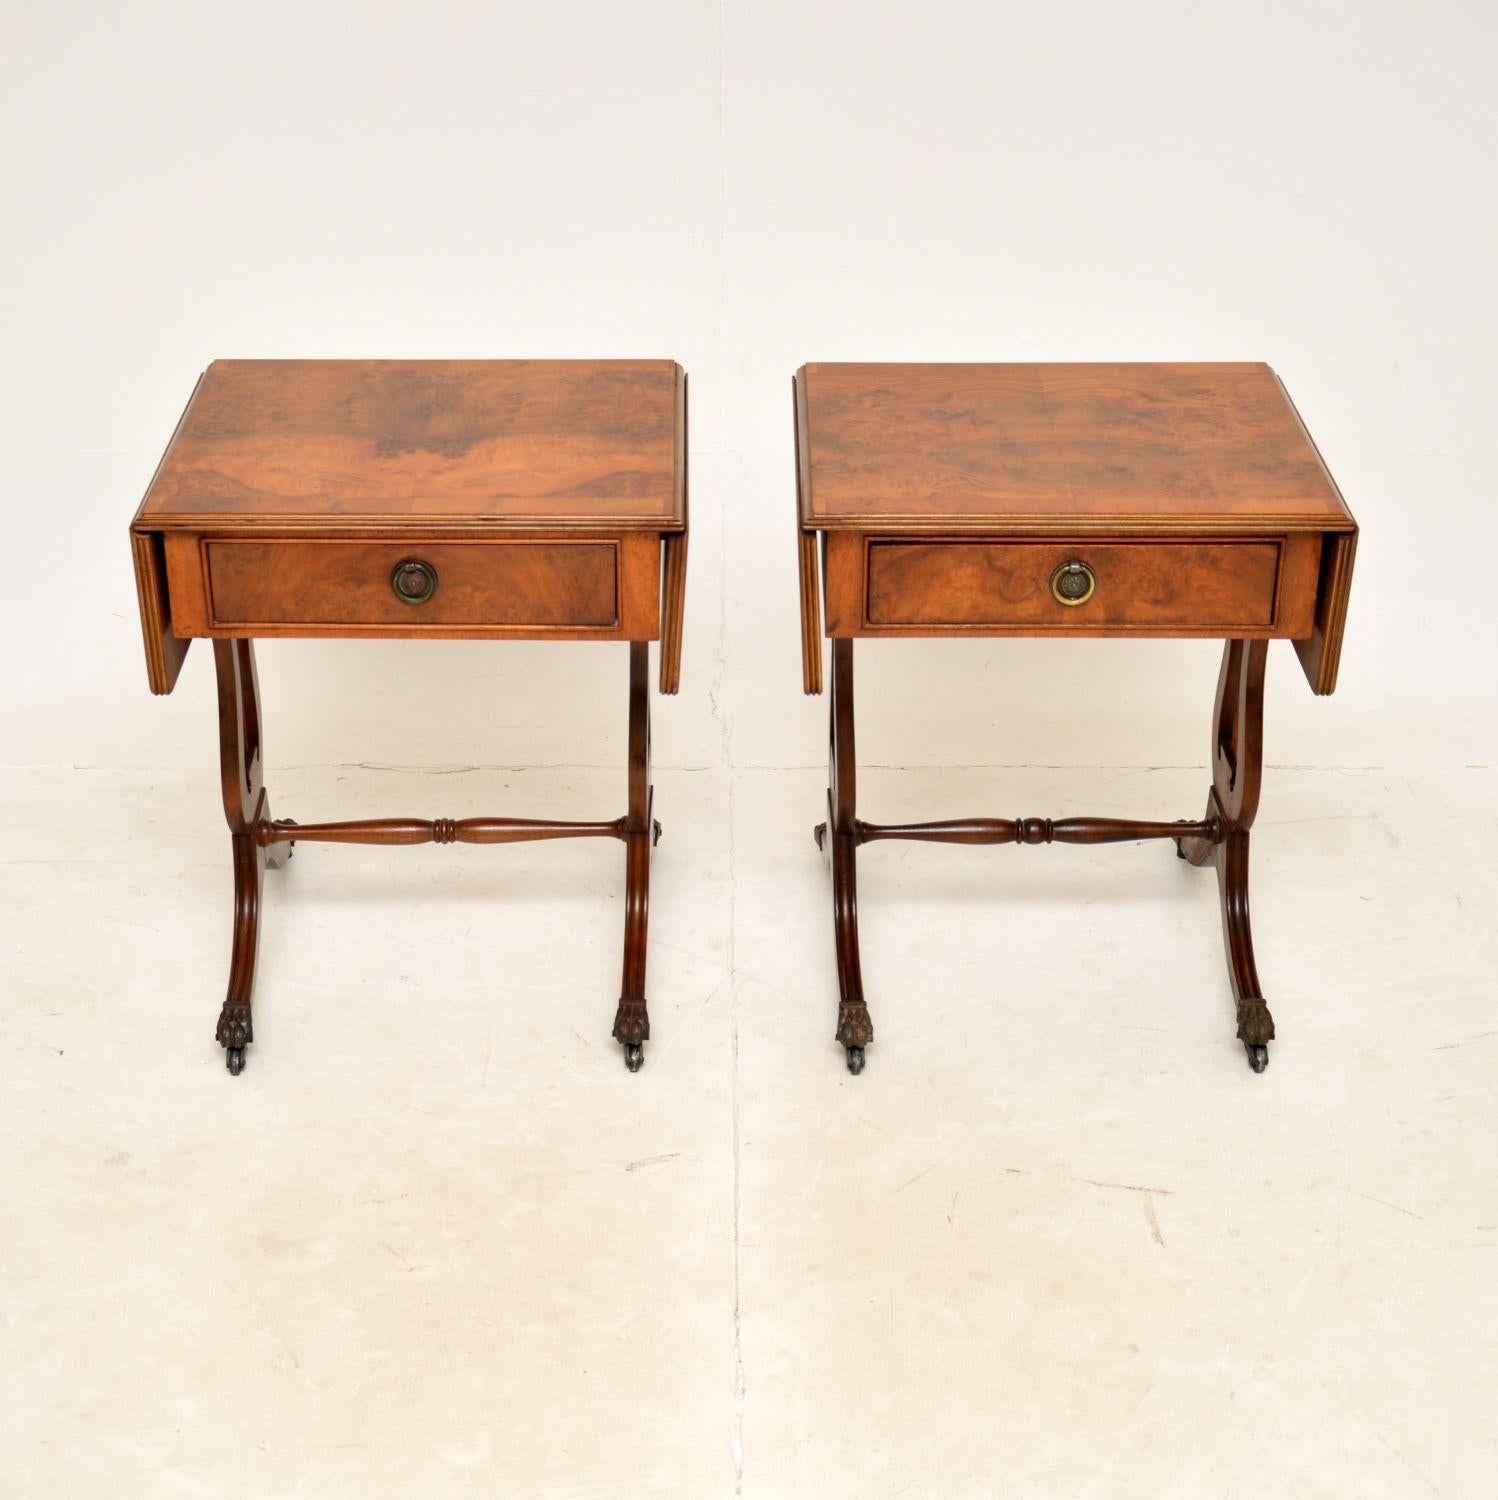 A fantastic pair of antique drop leaf side tables in burr walnut. They are in the Regency style, they were made in England and date from around the 1930s.

The quality is excellent, they are very well made and are a useful Size. The tops have drop